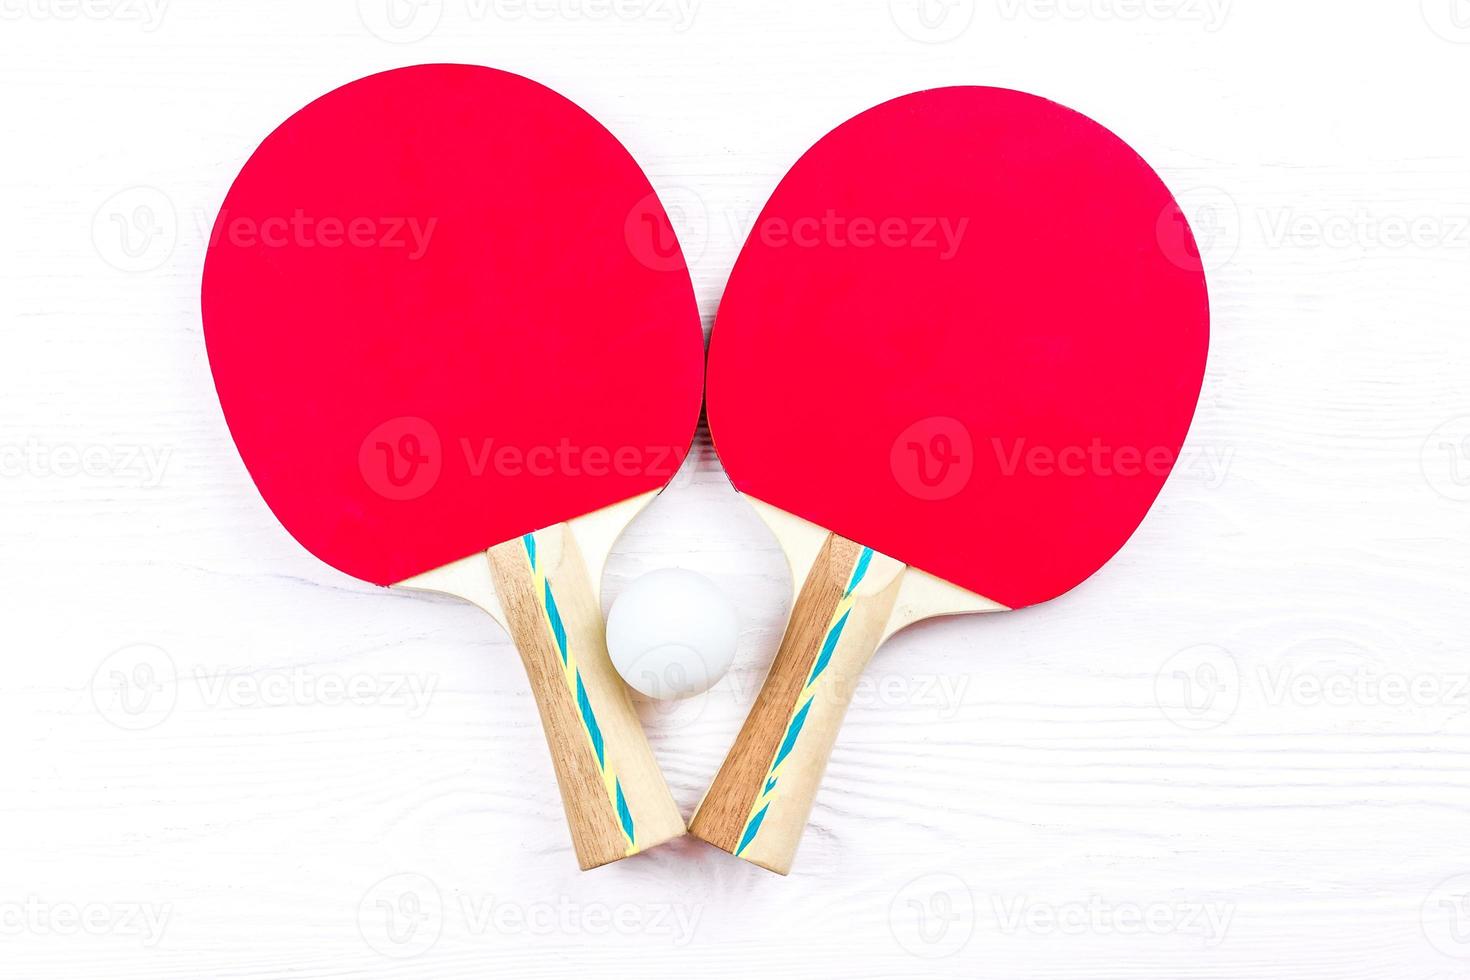 Rackets for table tennis photo